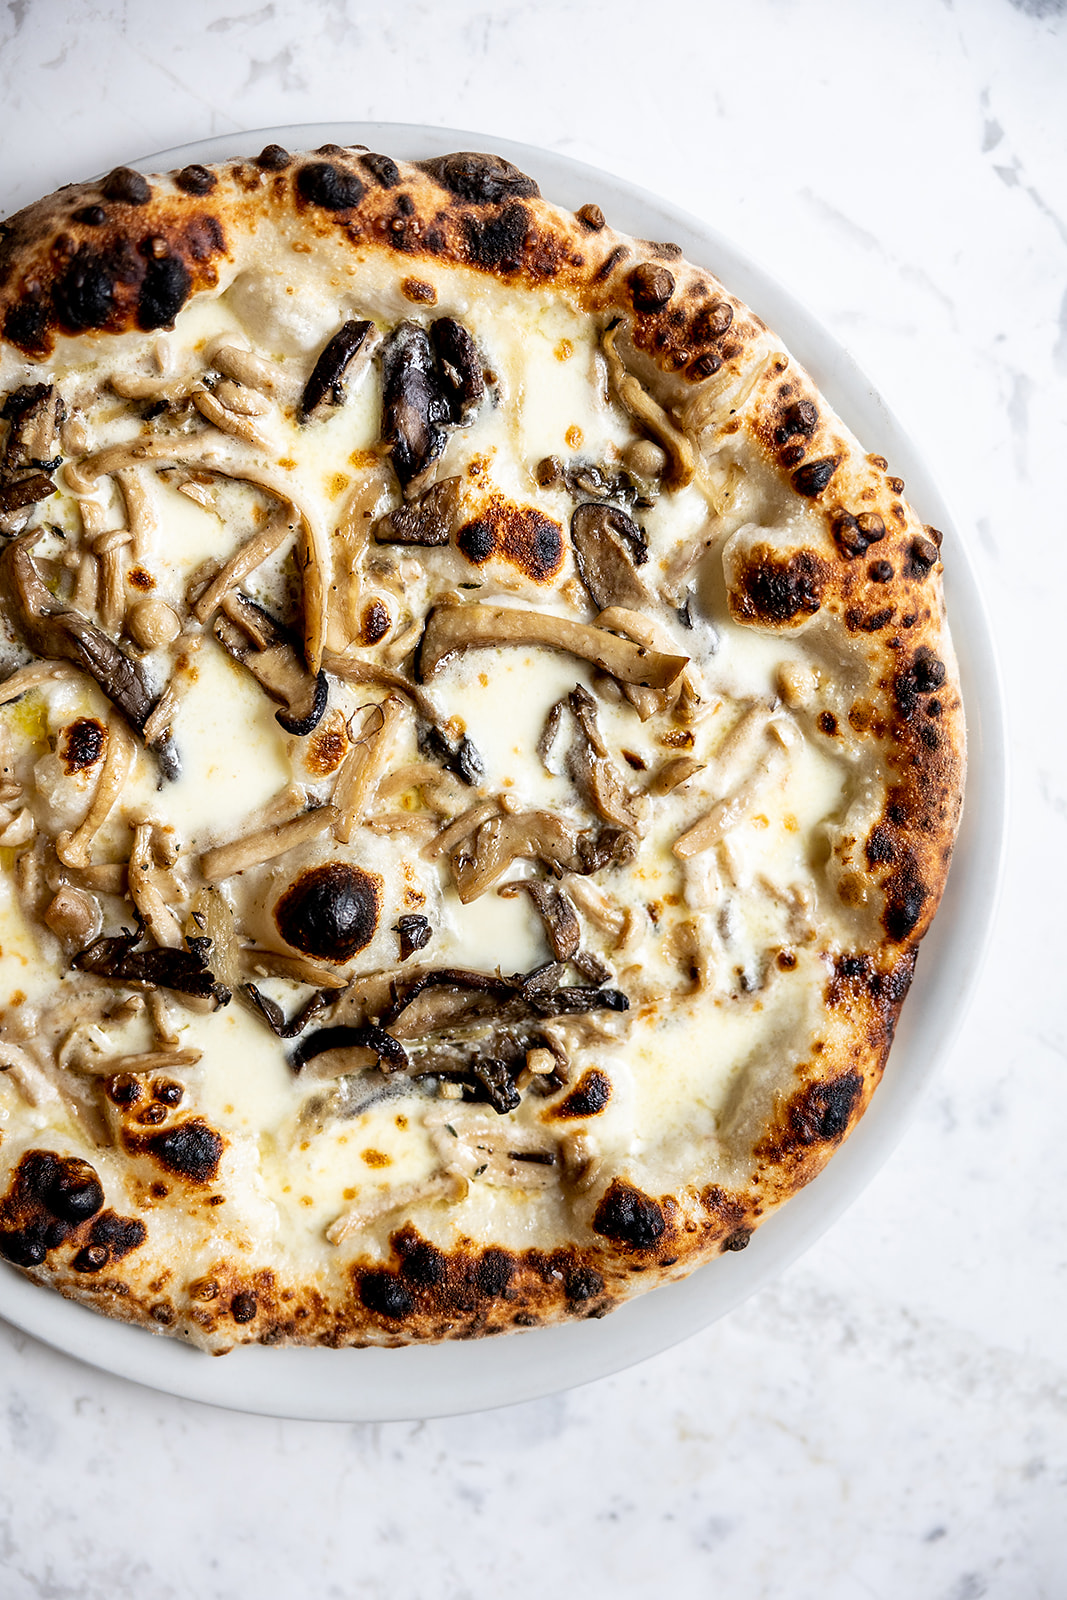 The Royal Funghi Pizza